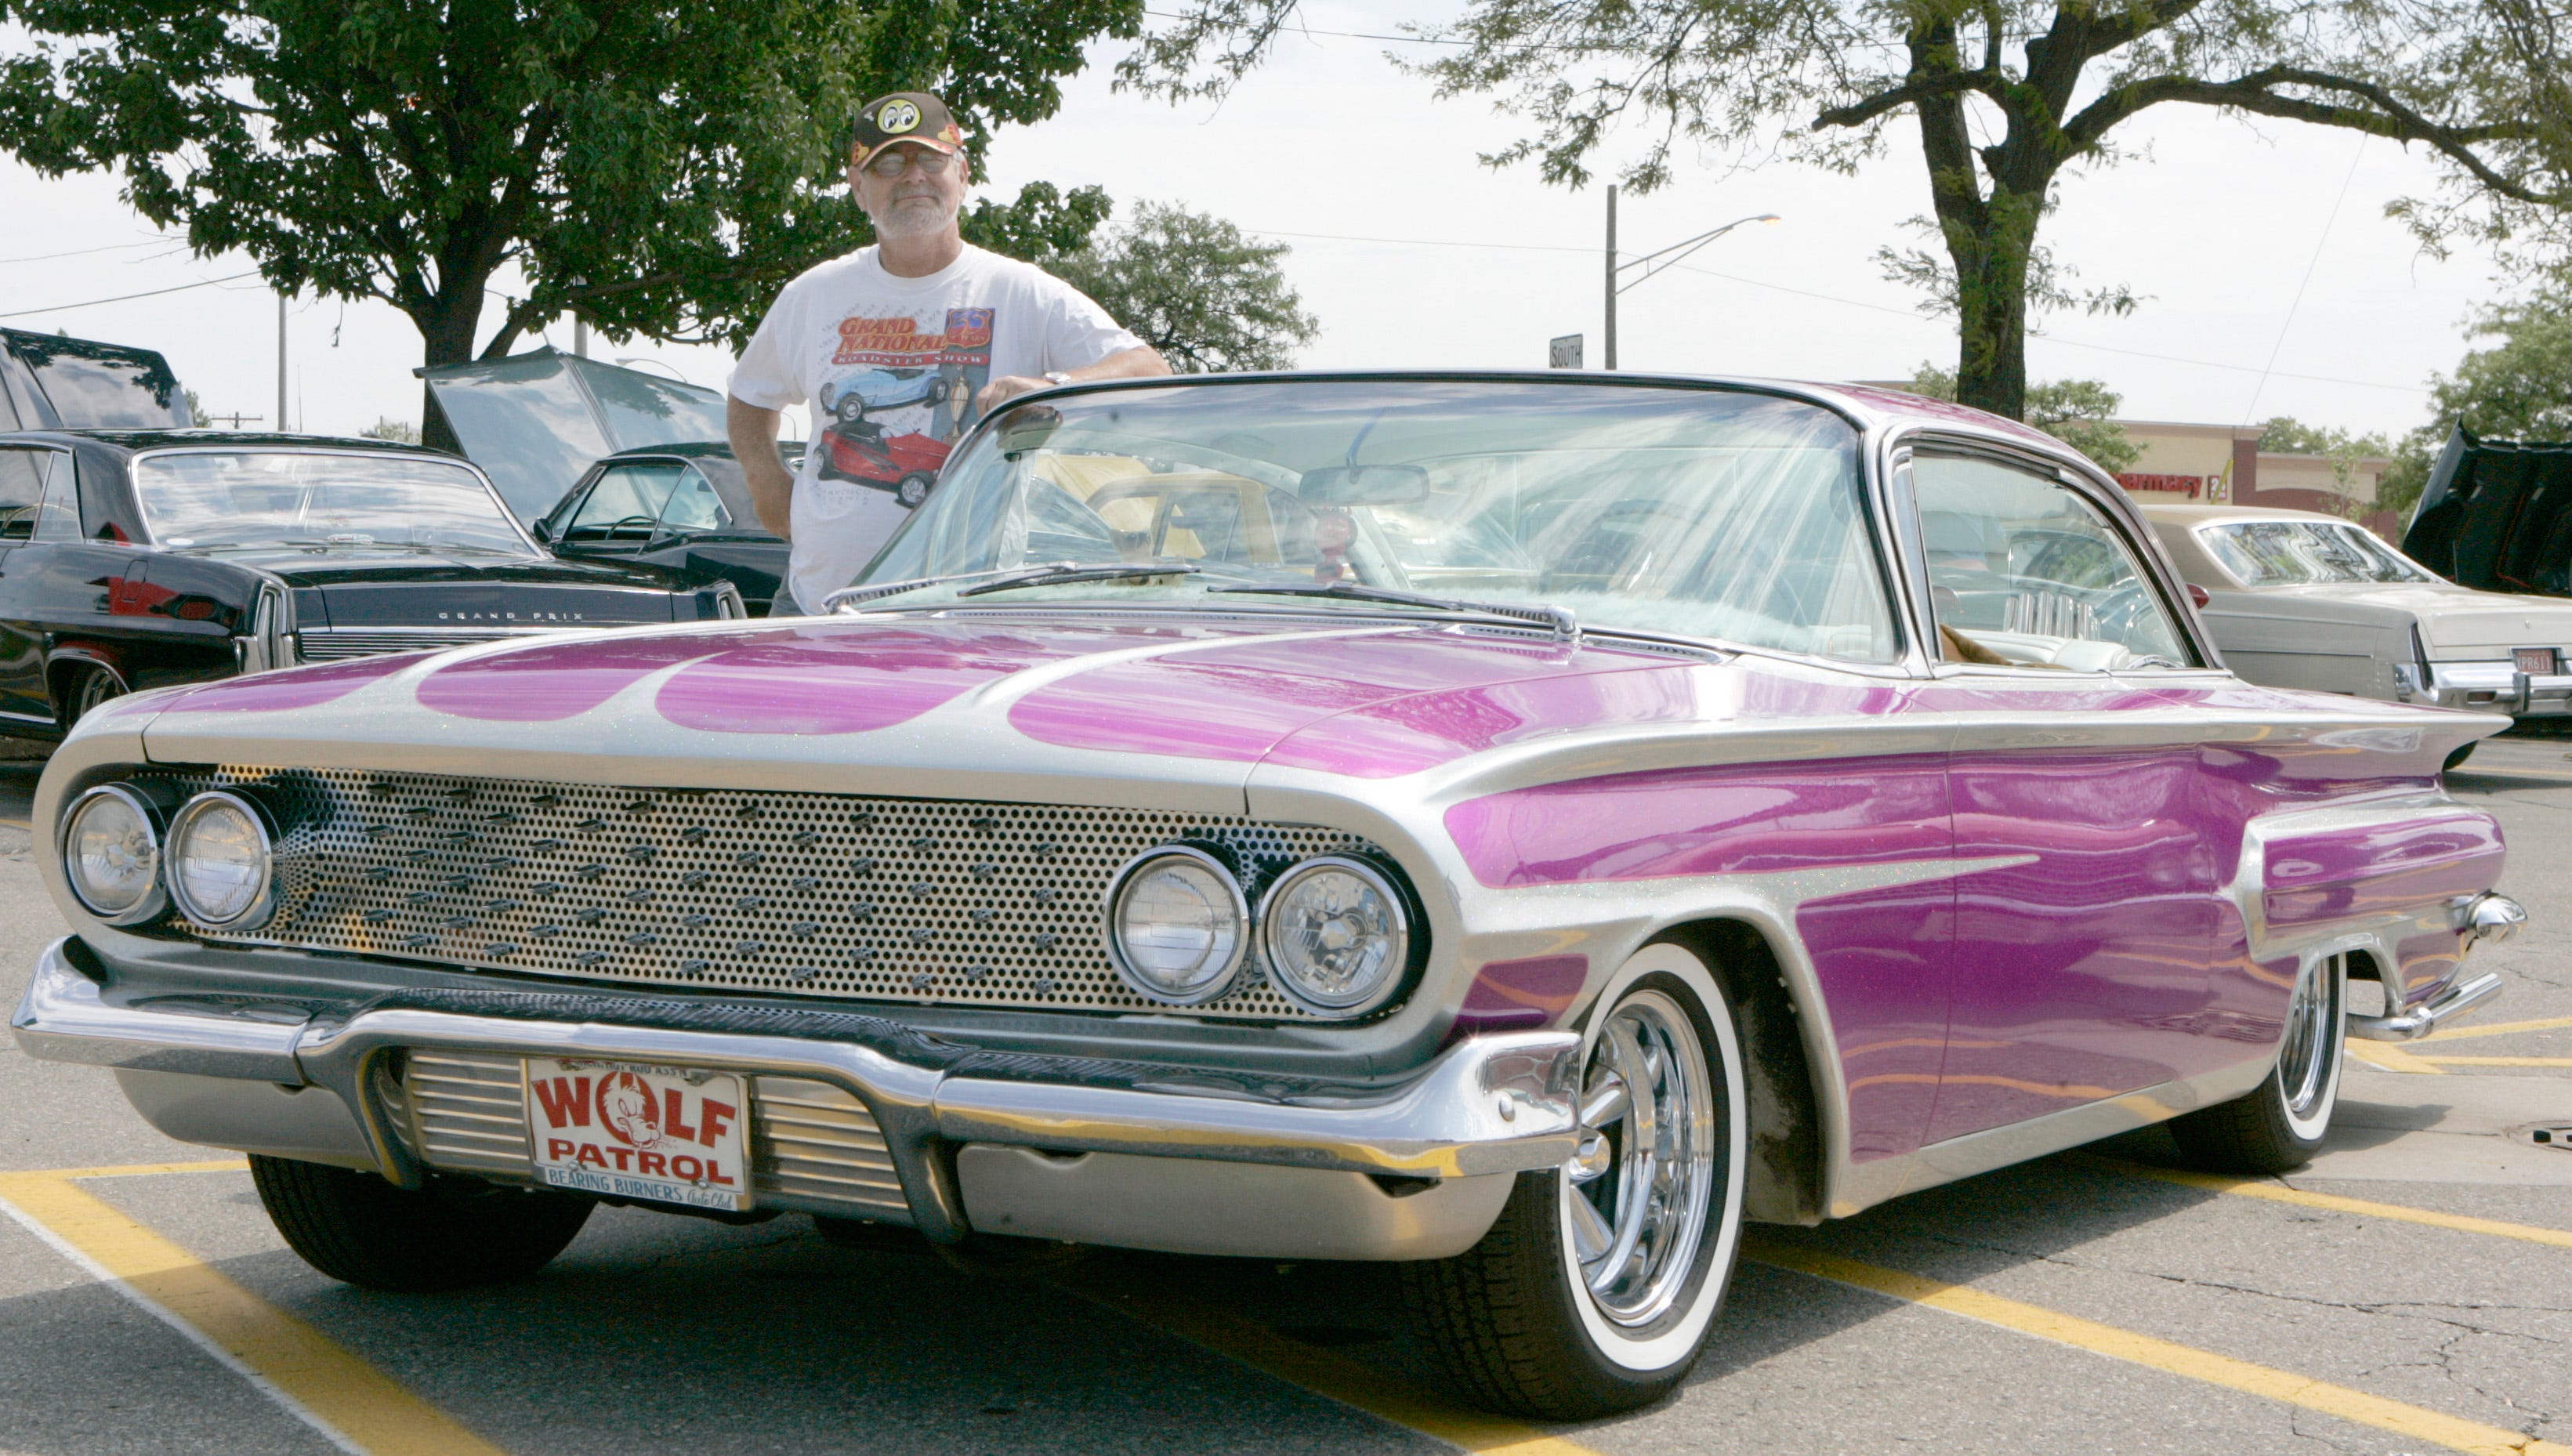 George Lusk of St. Clair Shores with his purple 1960 Chevrolet Impala in Royal Oak, Aug. 14, 2007.